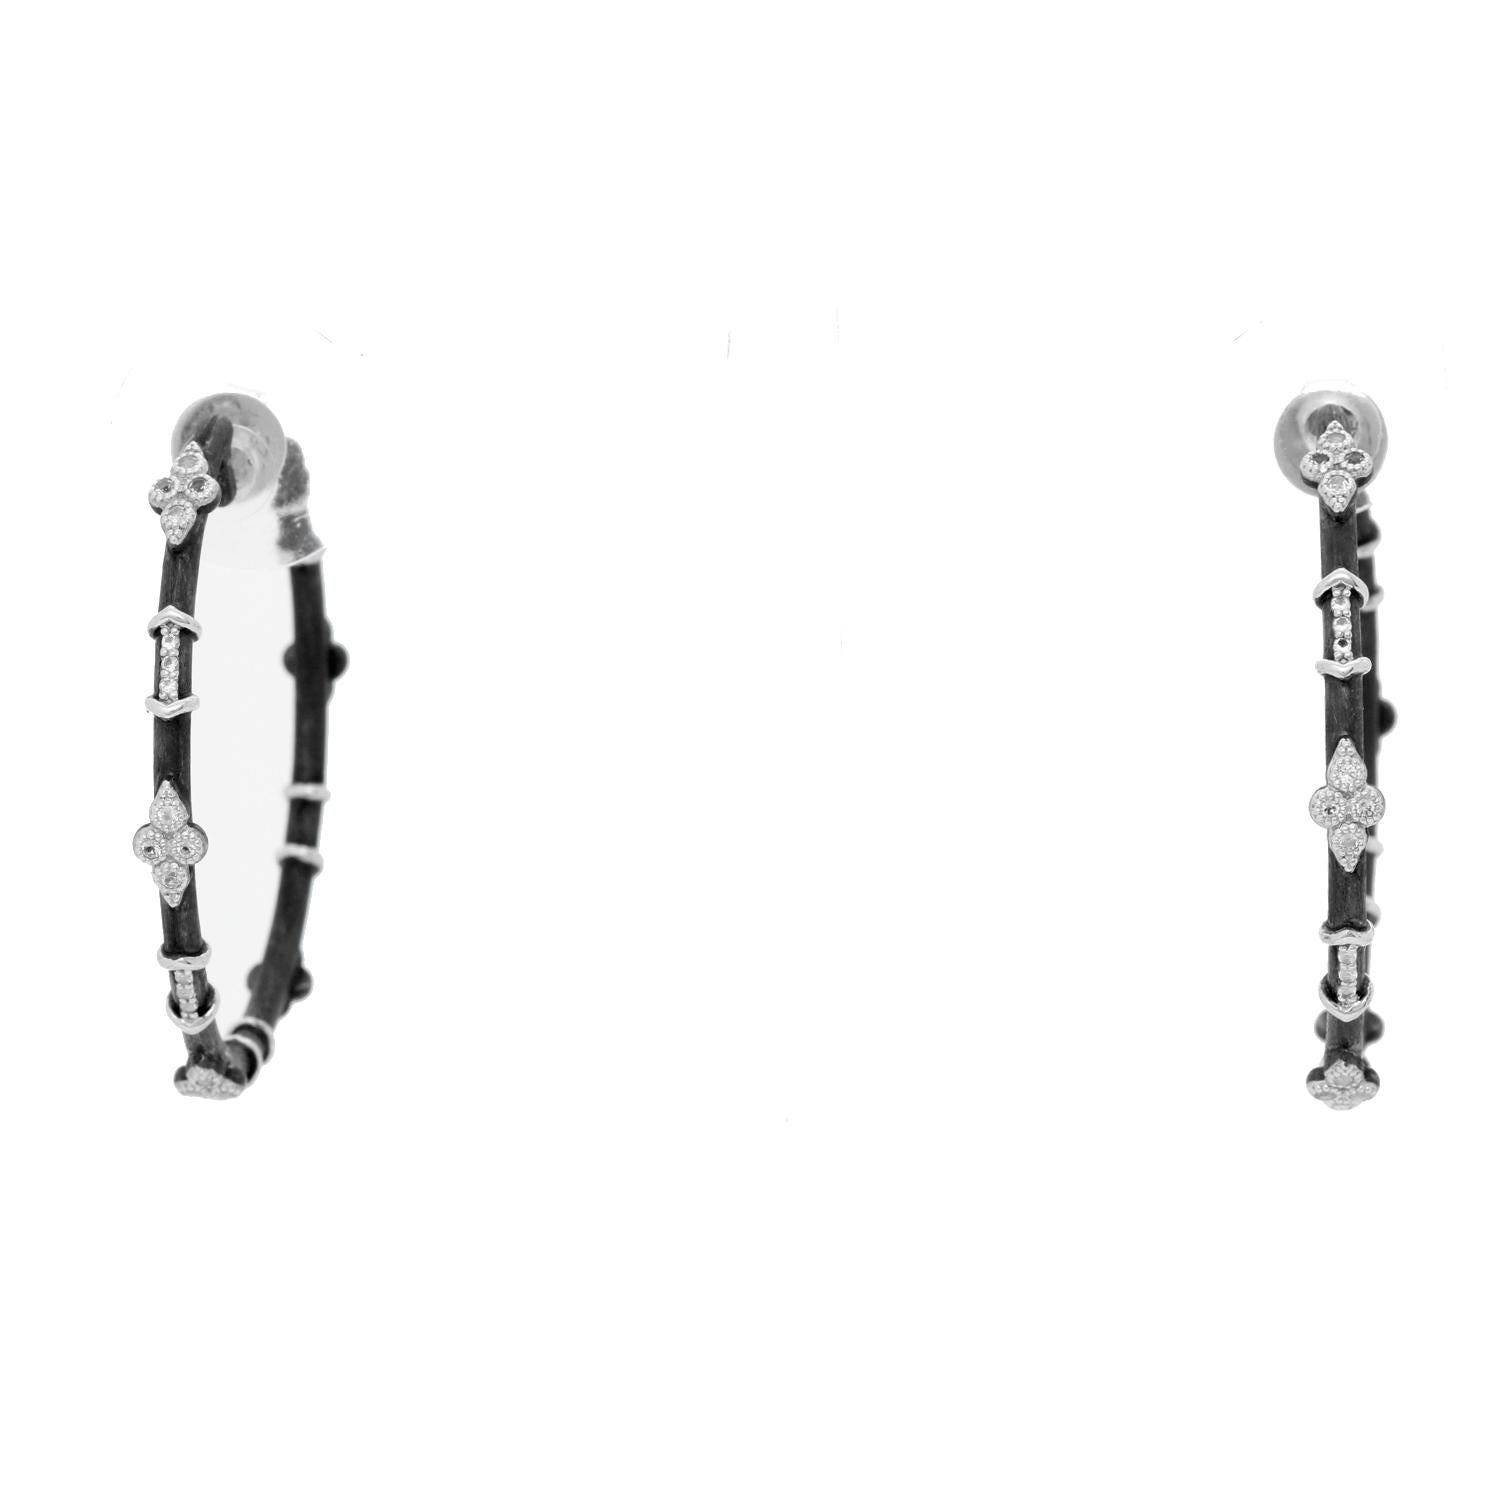 Jude Frances Silver Large Hoop Earrings - . Silver Large Moroccan hoop earrings featuring White Topaz set in sterling silver brushed with black rhodium. Great for every day! Diameter 2 mm . Length 40 mm.